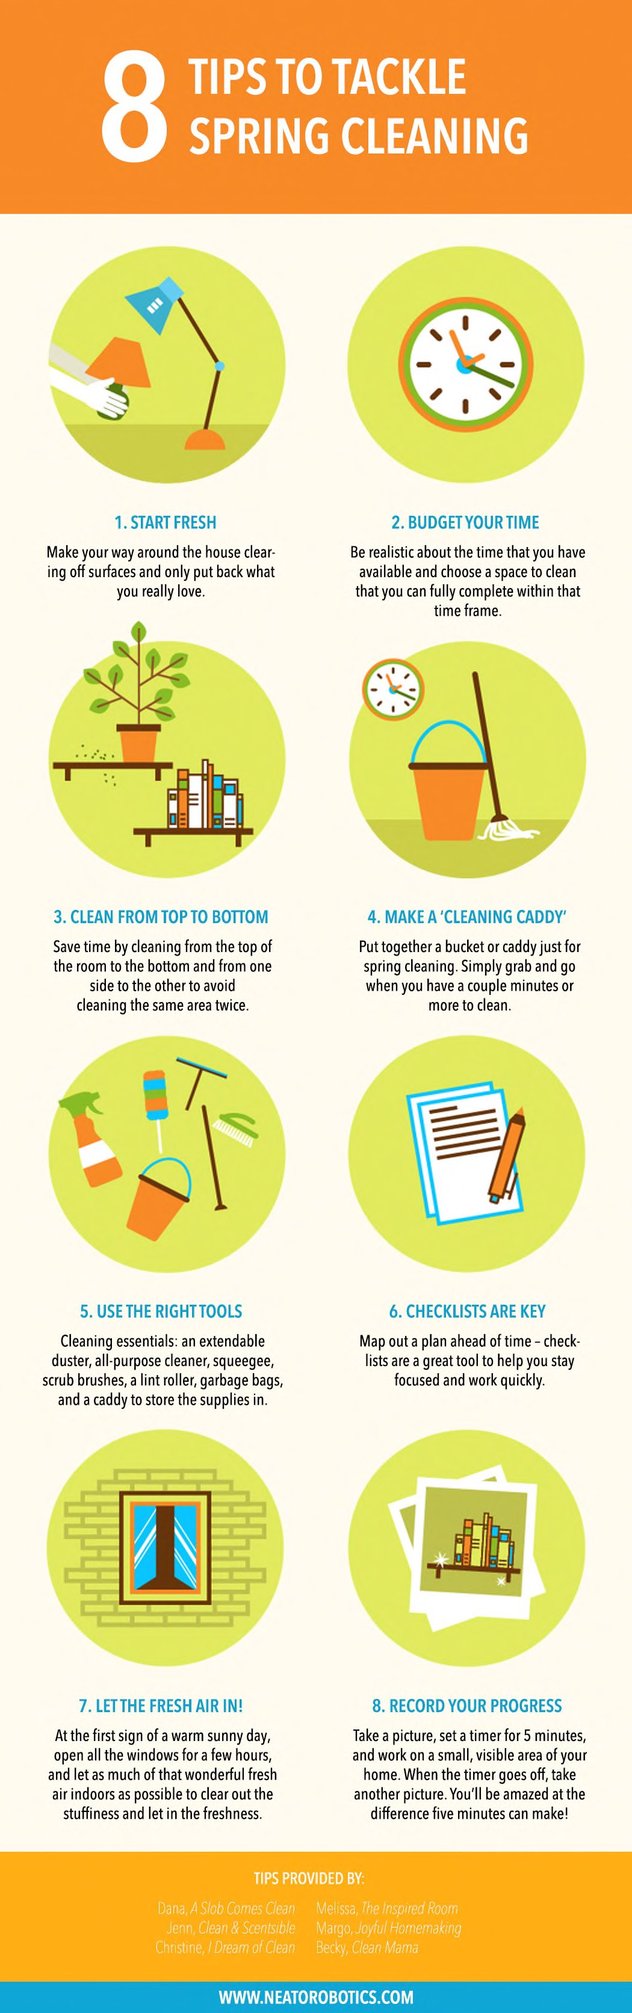 Spring-Cleaning-Infographic.jpg